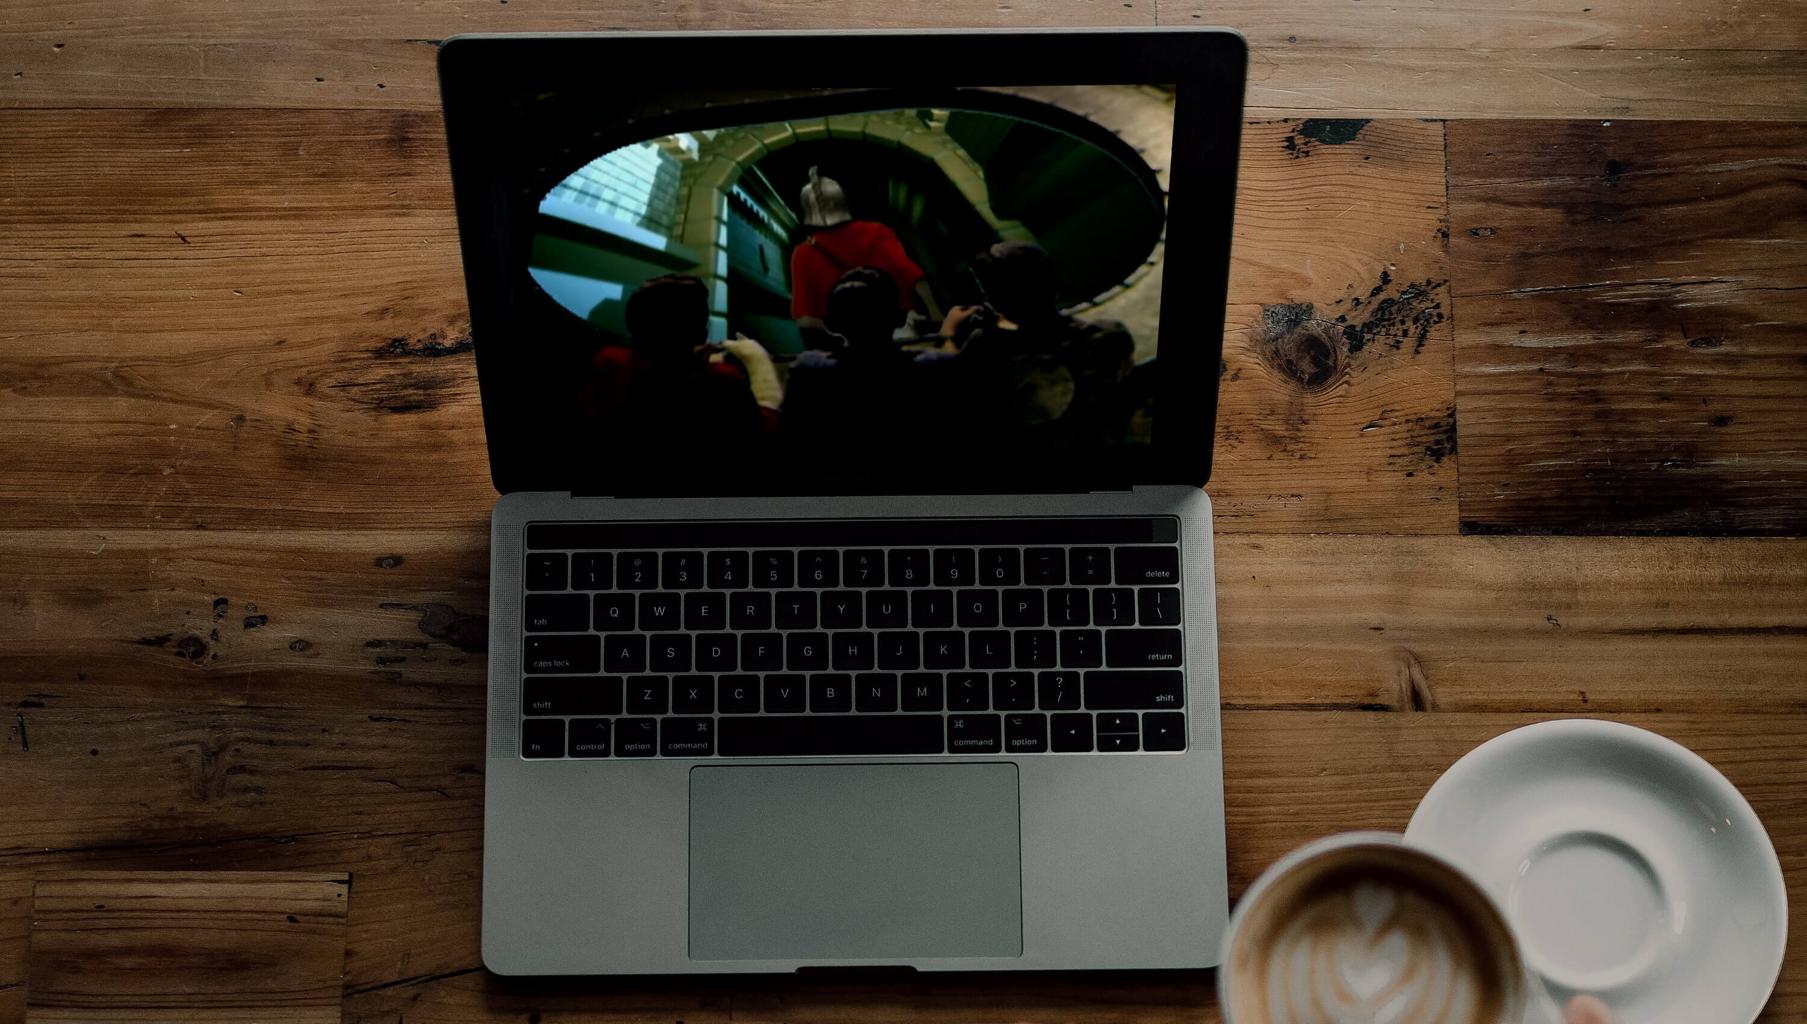 Watching Knightmare clips on a laptop with coffee. Adapted from photo by Nathan Ansell on Unsplash.